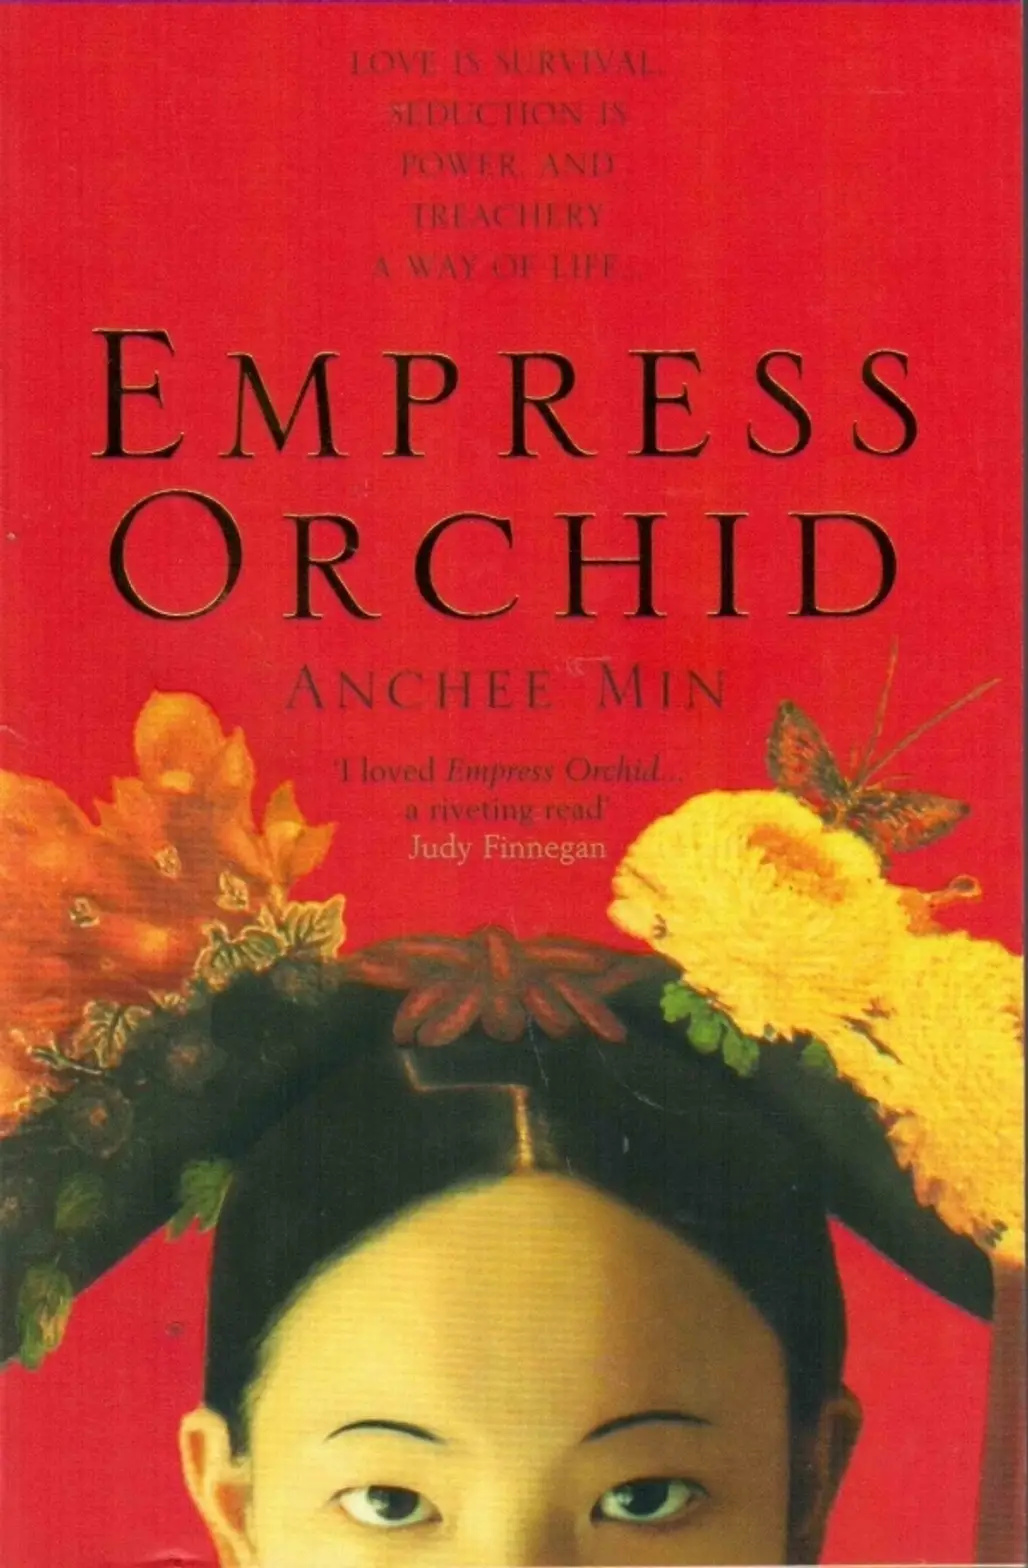 Empress Orchid by Anchee Min